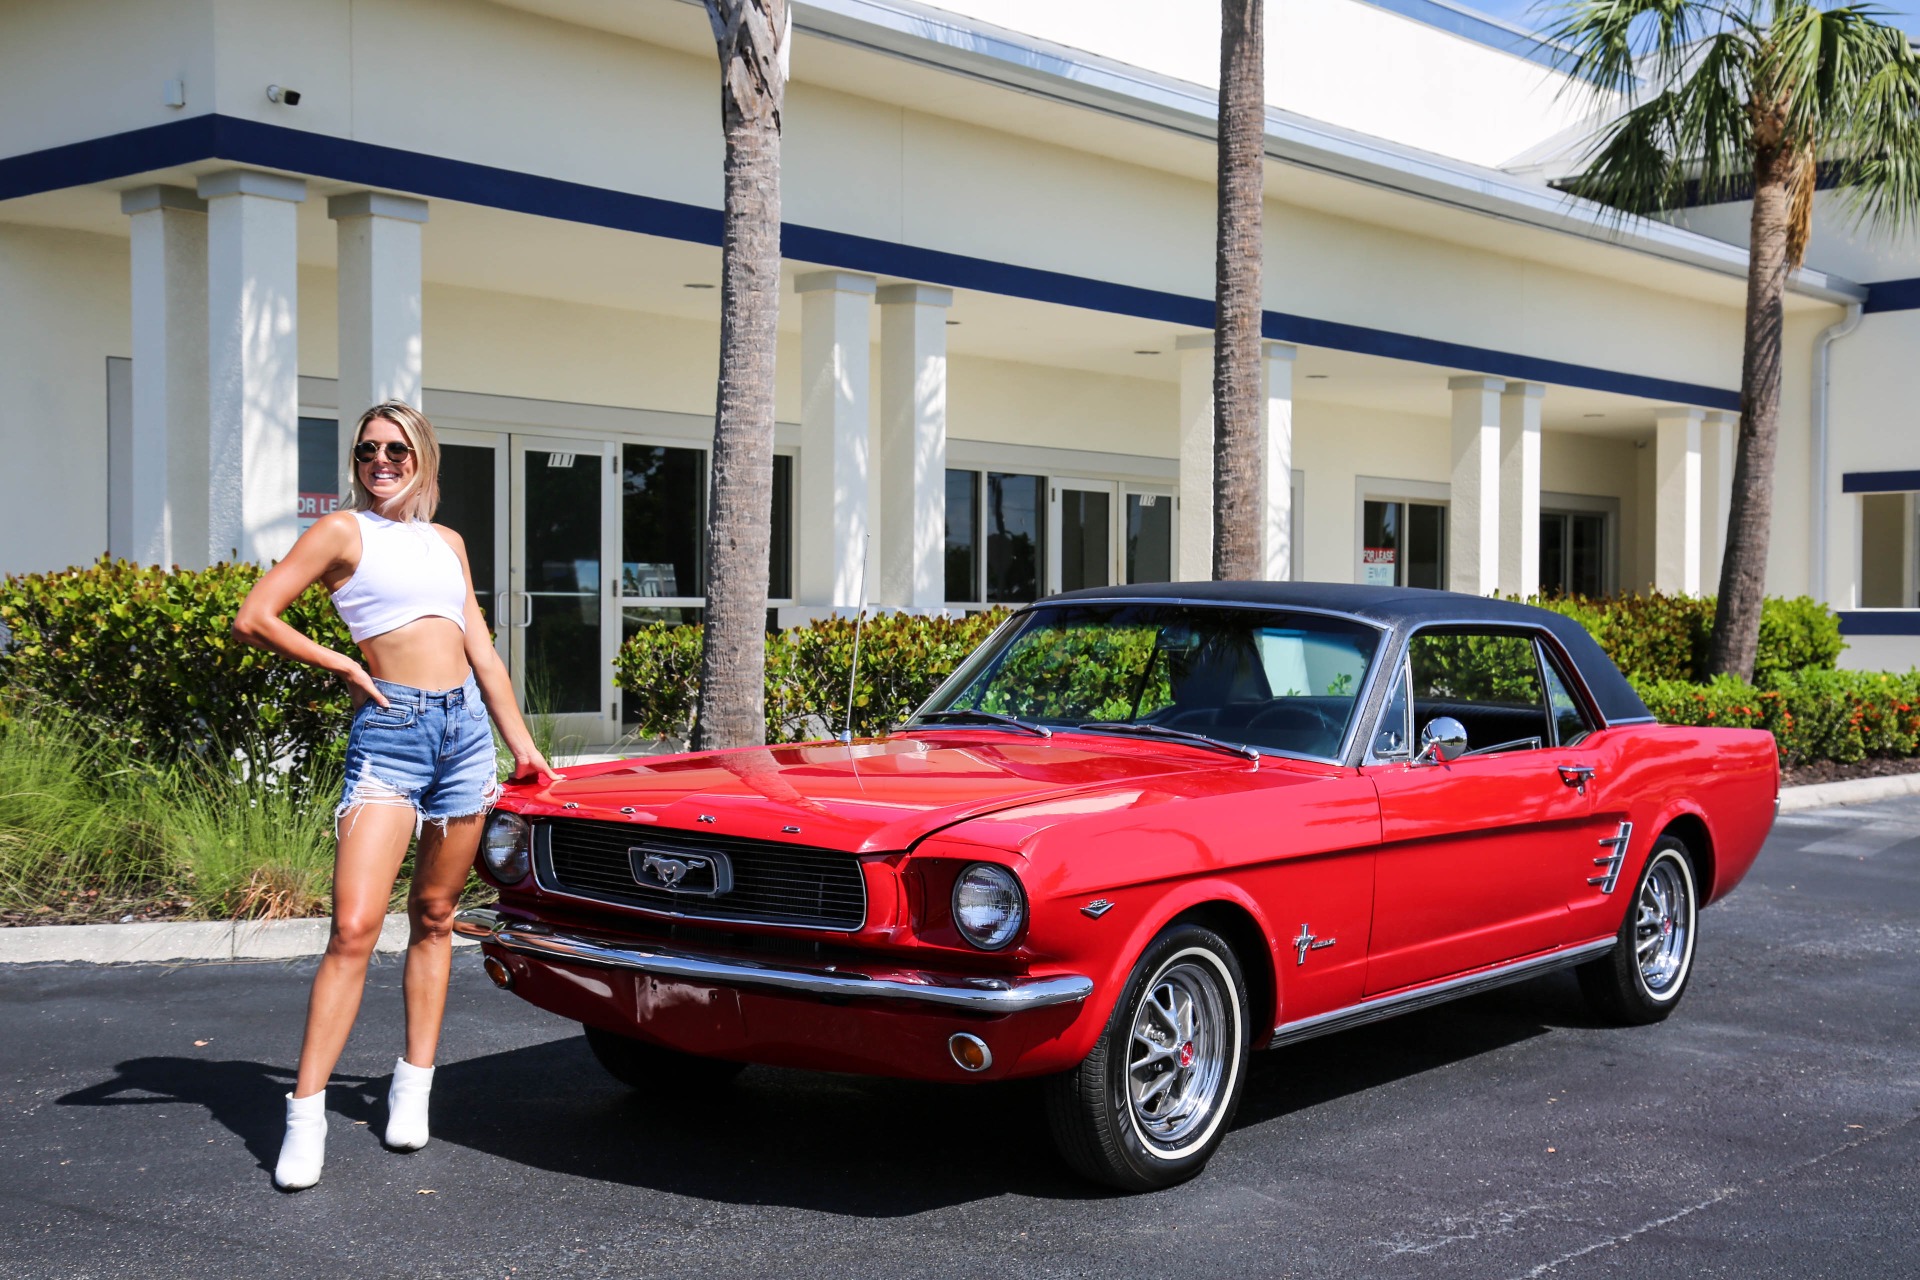 Used 1966 Ford Mustang C Code V8 Manual for sale Sold at Muscle Cars for Sale Inc. in Fort Myers FL 33912 1